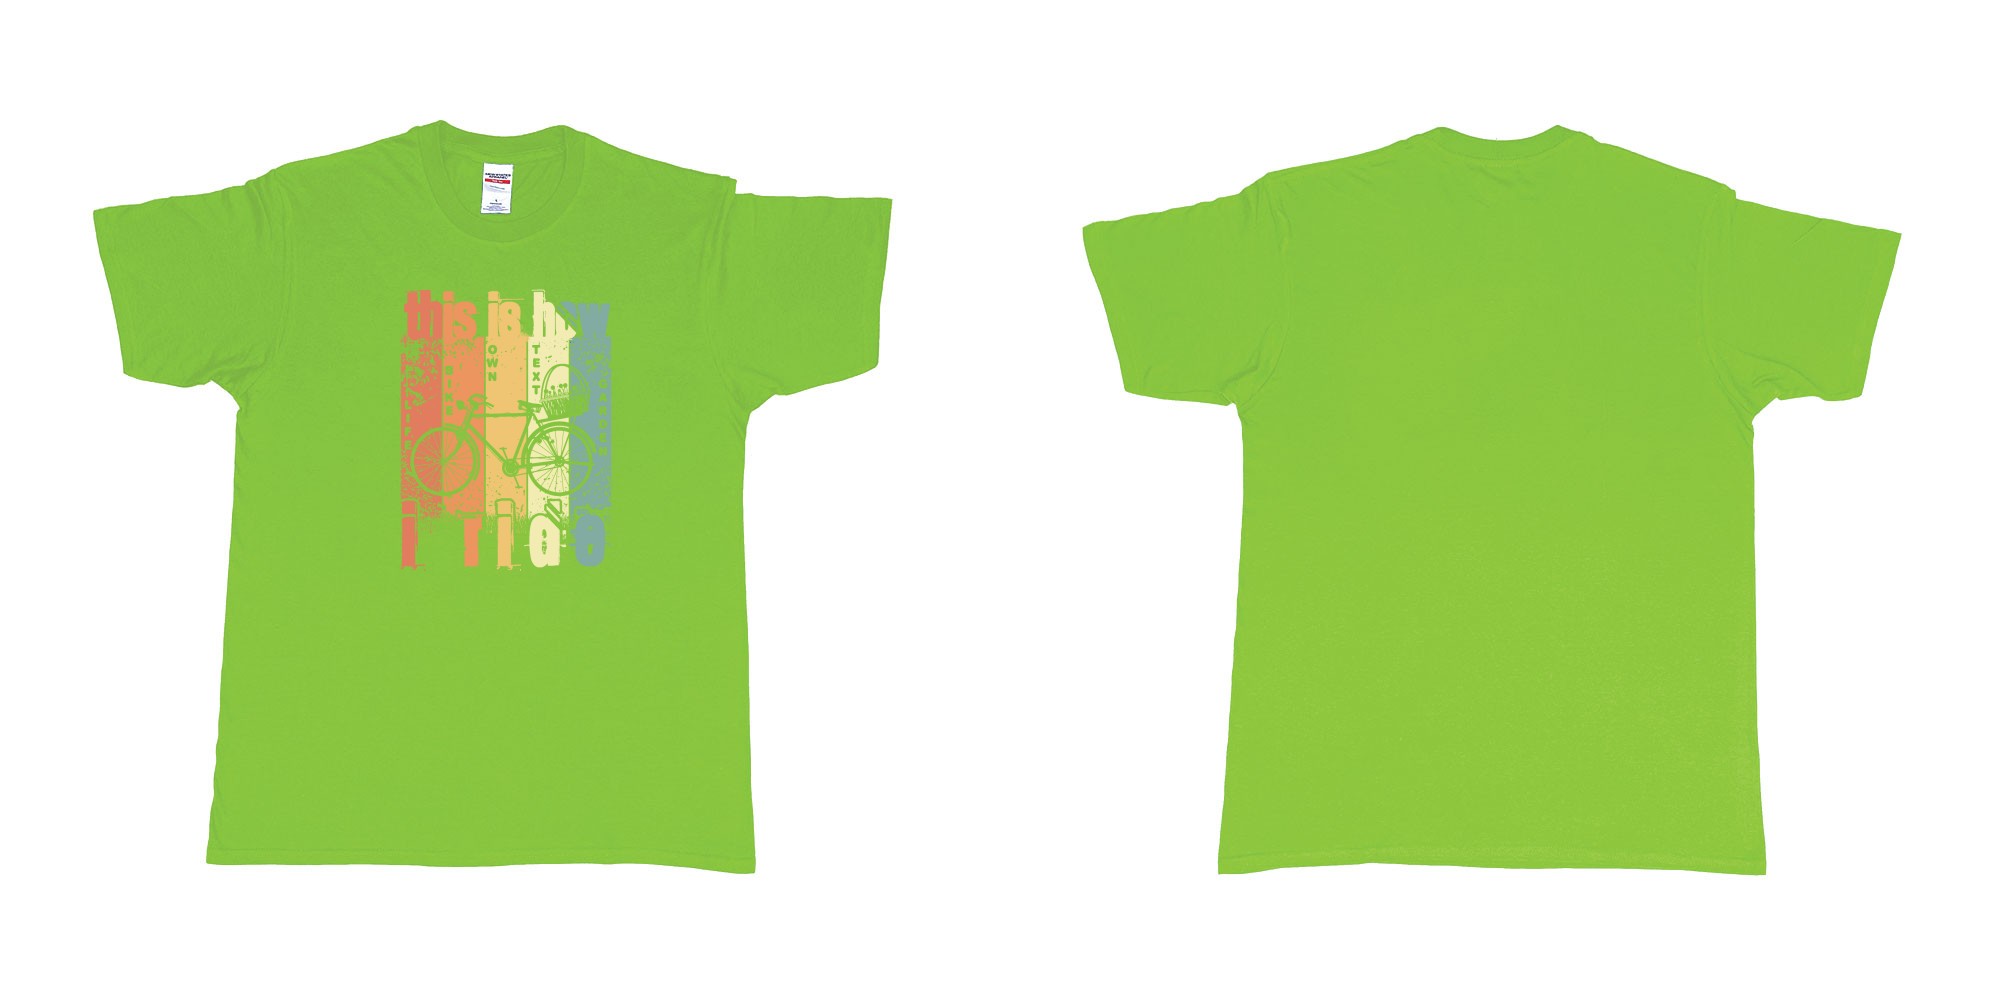 Custom tshirt design this is how i ride old bicycle gardening your own text printing teeshirts bali in fabric color lime choice your own text made in Bali by The Pirate Way